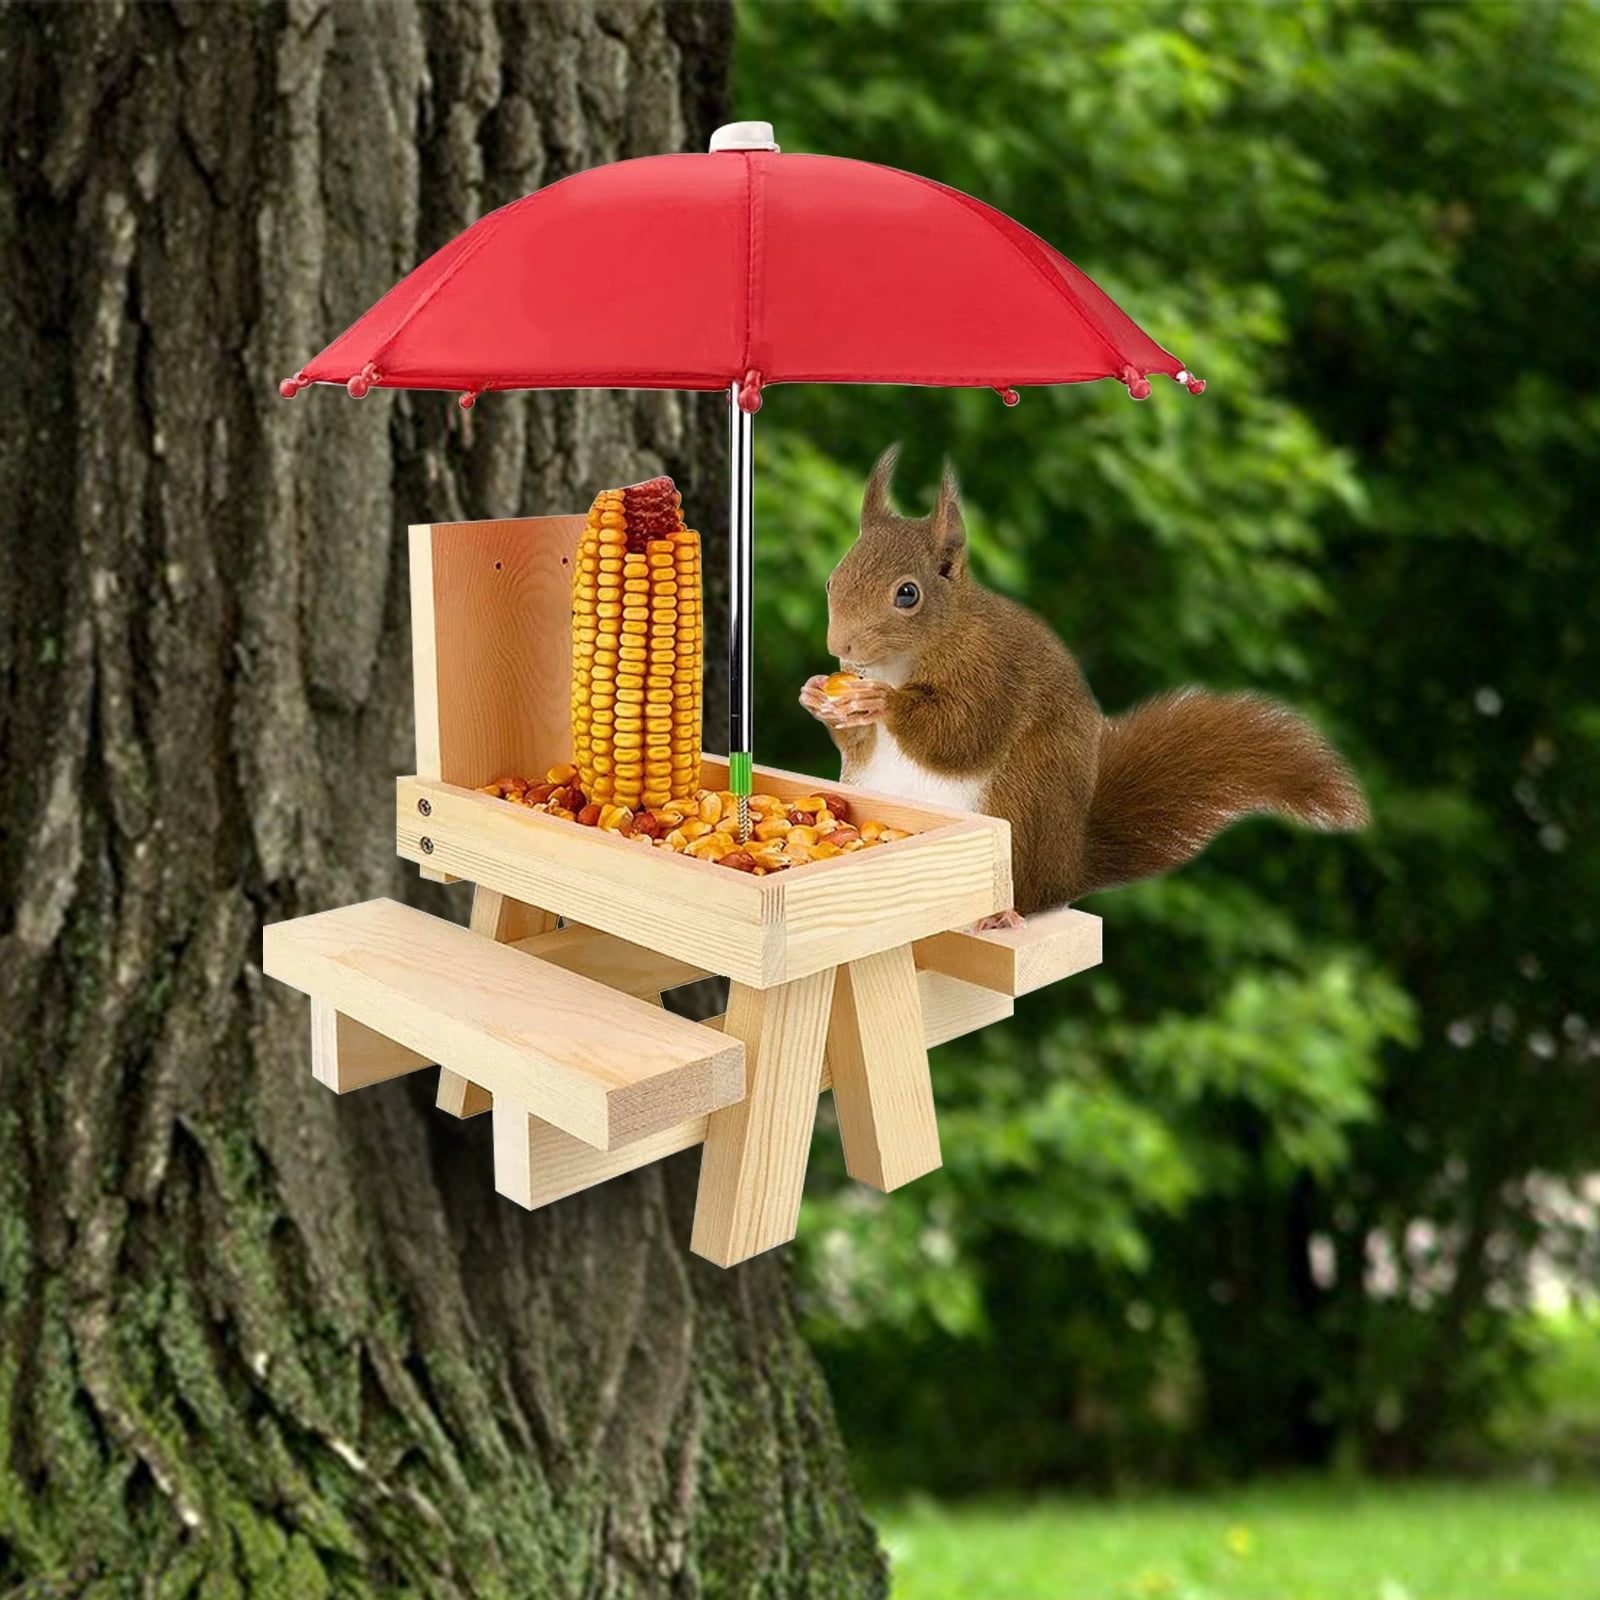 Easy To Install Built Strong Bowl For Squirrel Food Nuts And Water 100% FSC Certified Wood Responsibly Made. Squirrel Picnic Table Feeder For Outdoors Corn Cob Holder Peanuts Great For Gift 